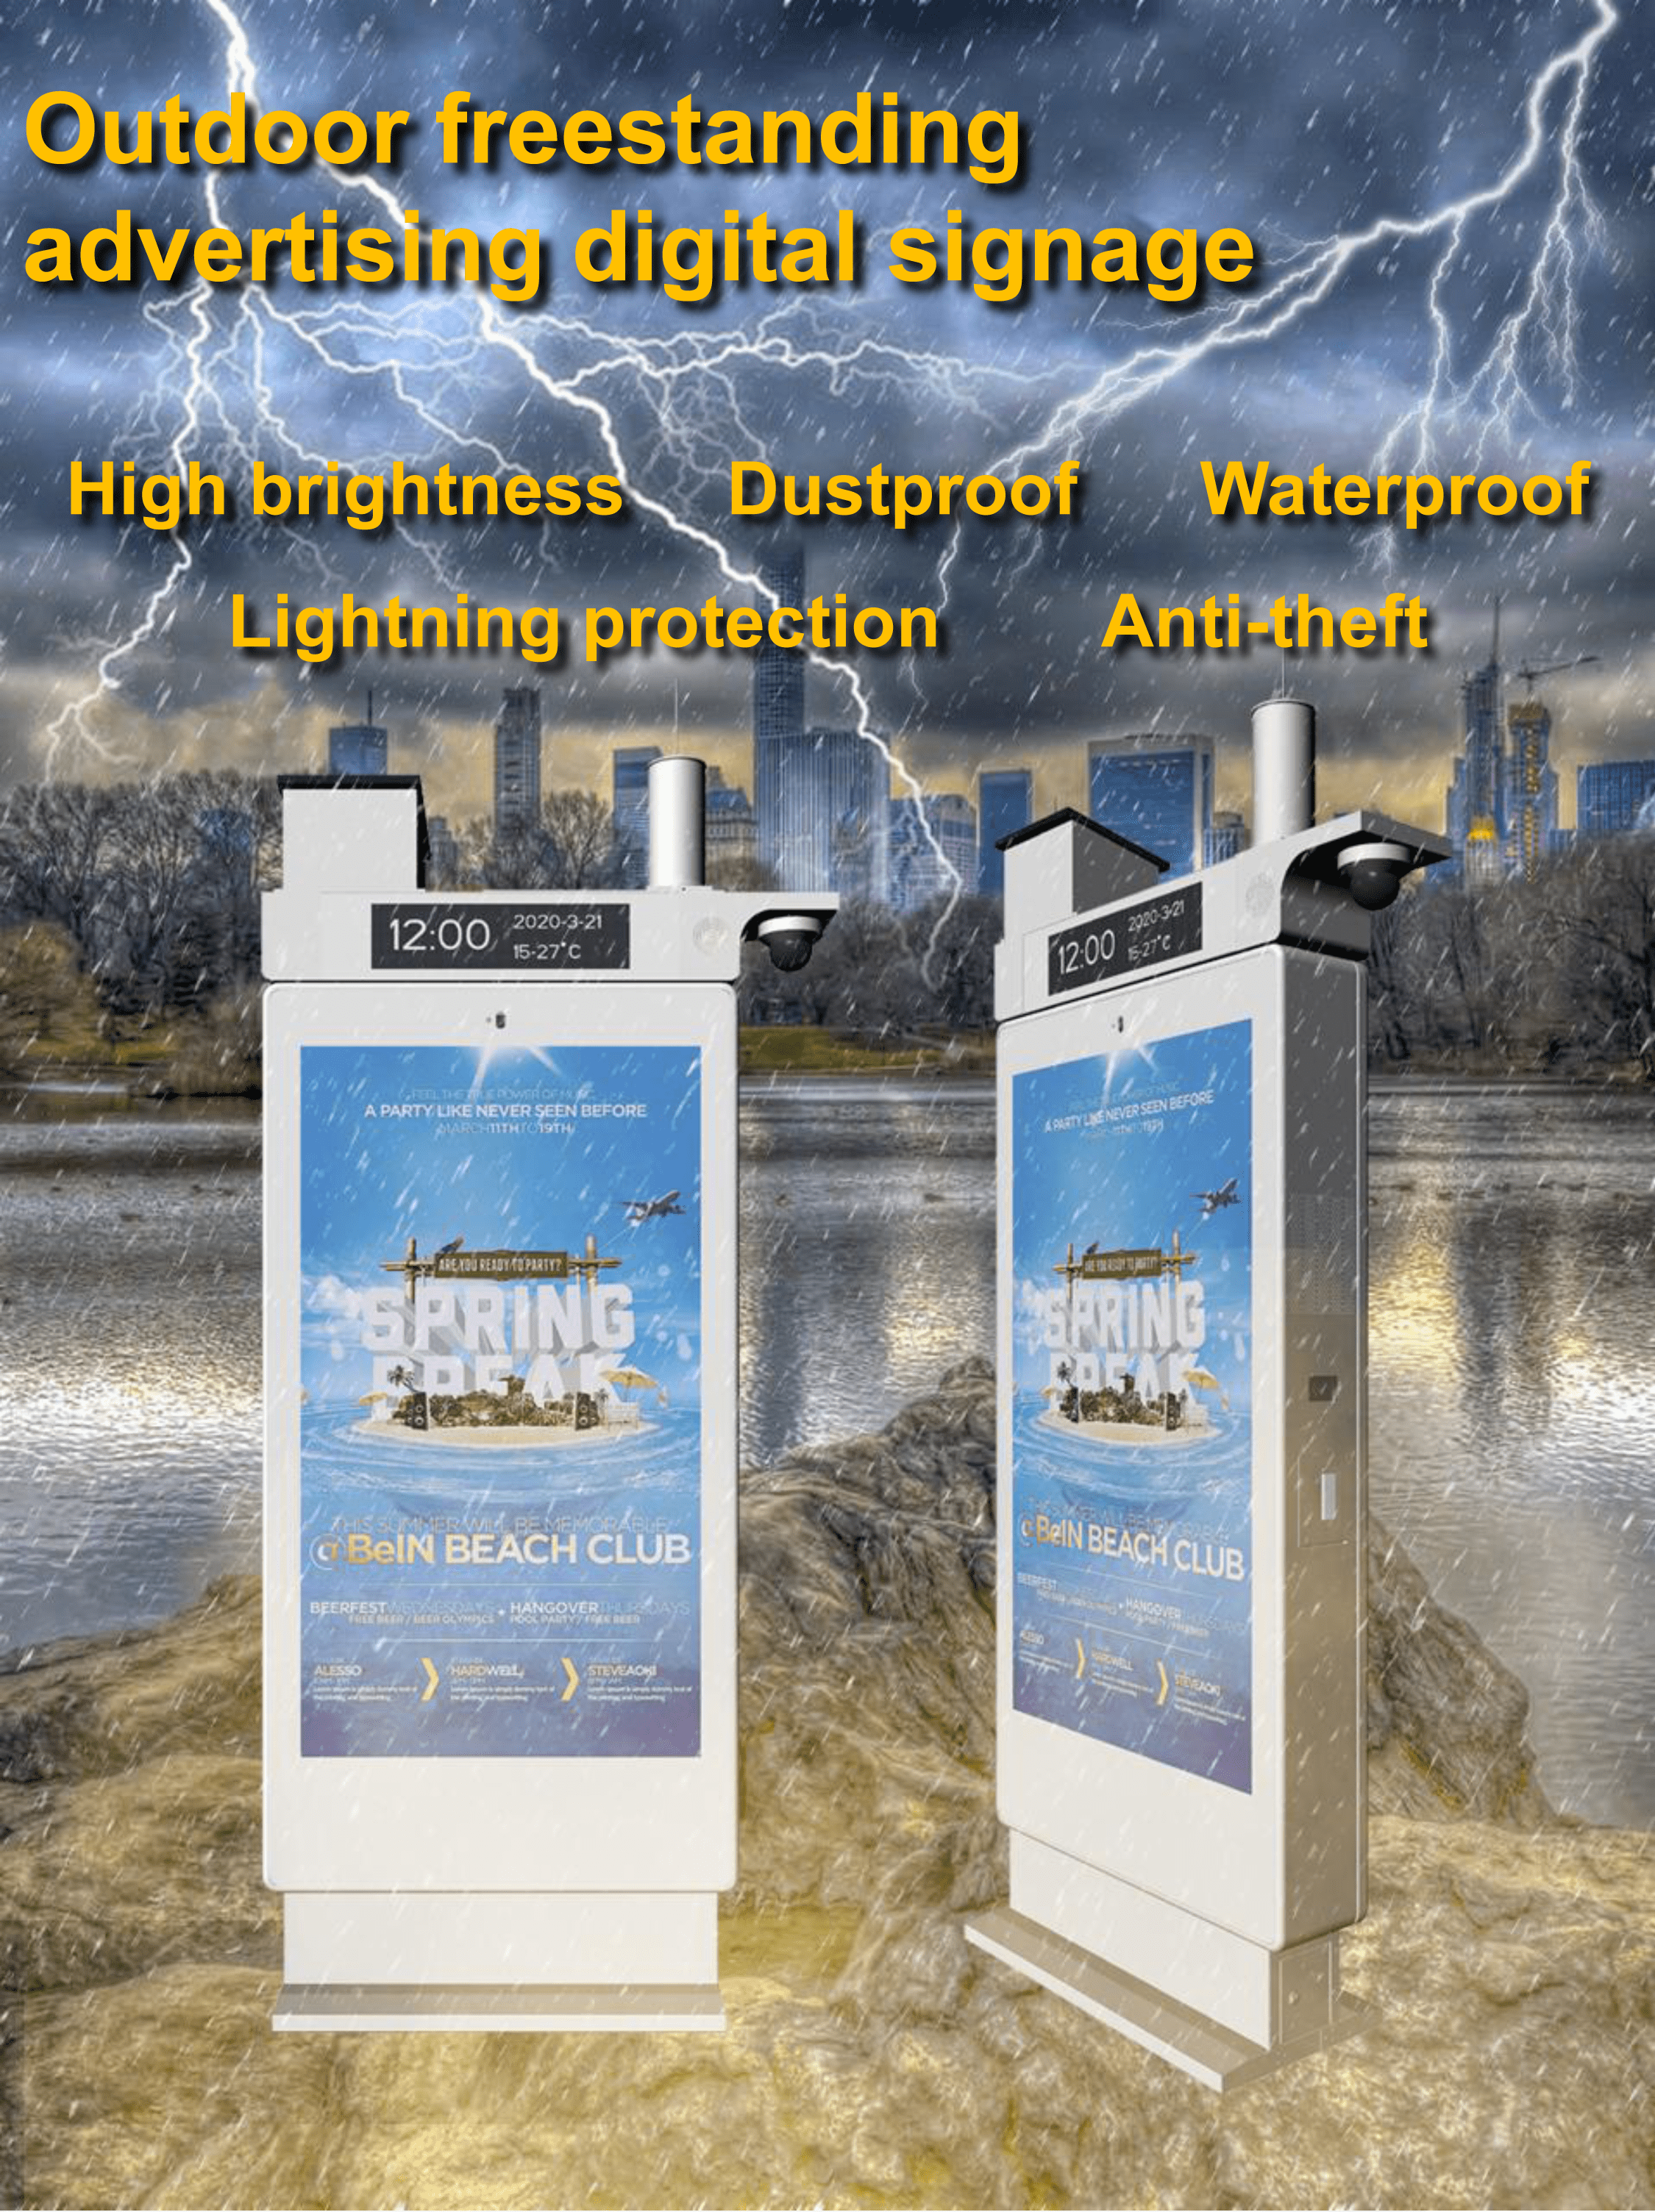  Outdoor Freestanding Advertising Digital Signage with lightning and explosion protection display